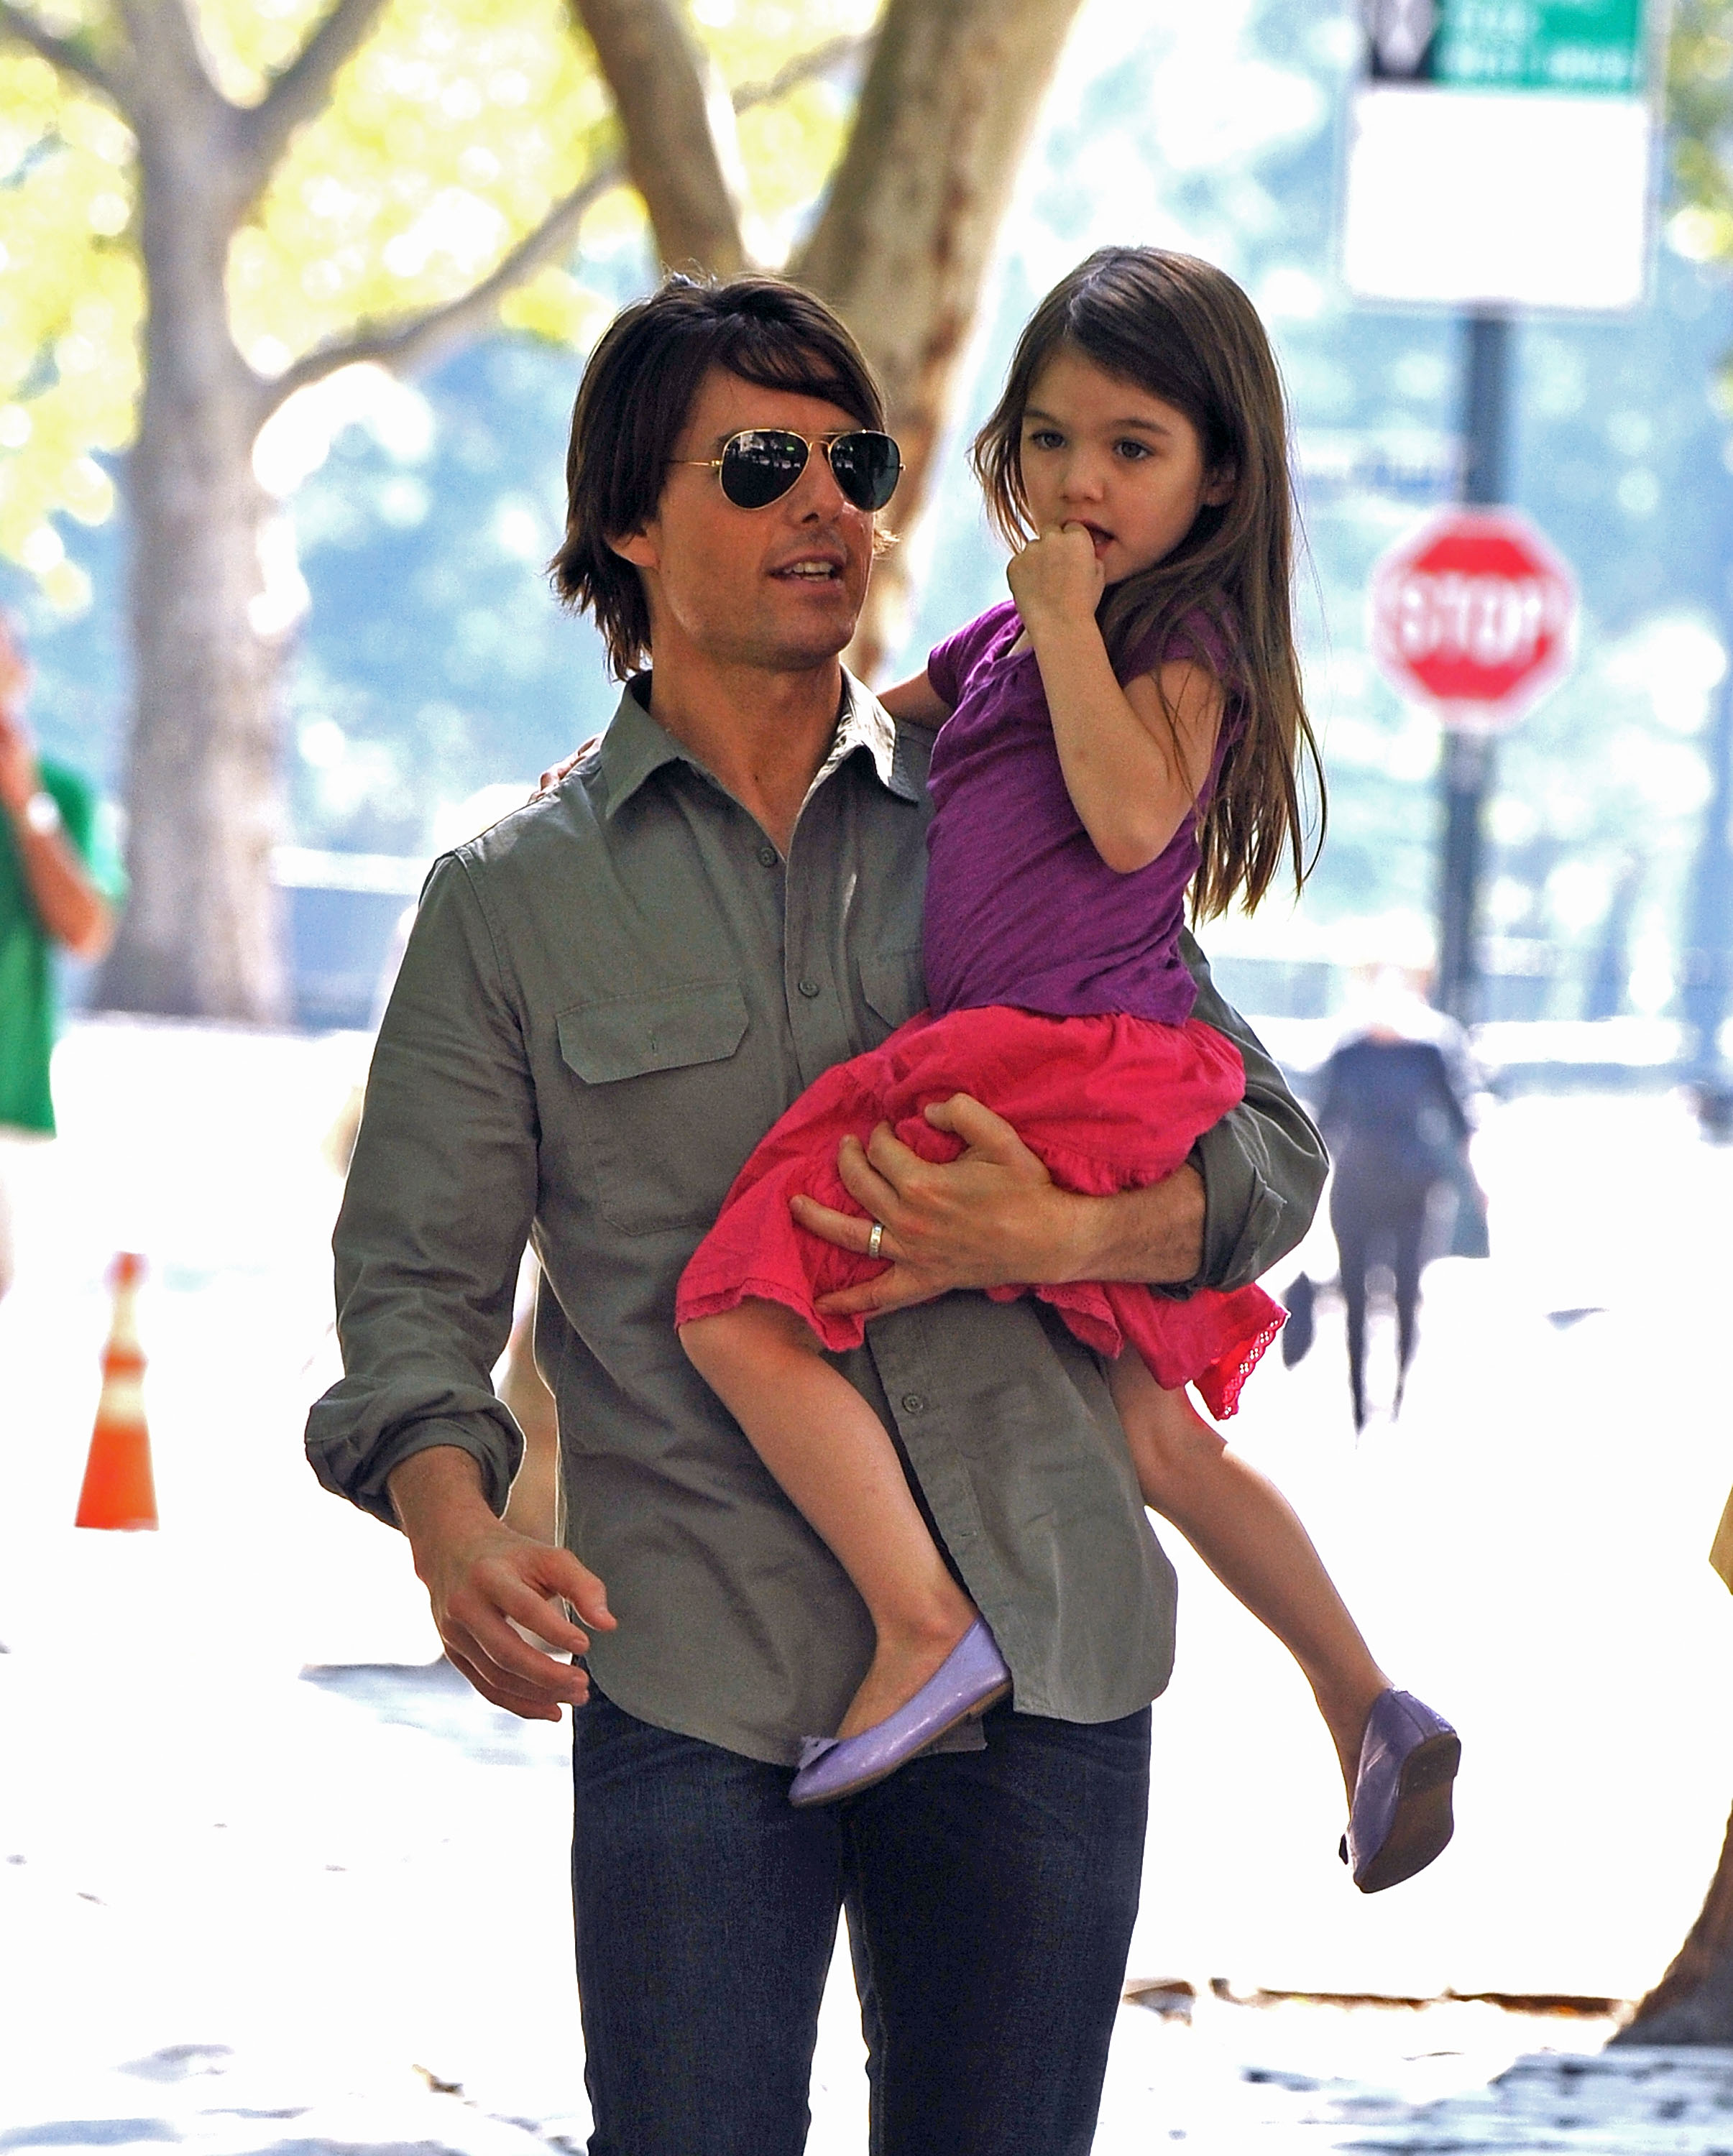 Tom and Suri Cruise visit a Central Park West playground on September 7, 2010 in New York City | Source: Getty Images